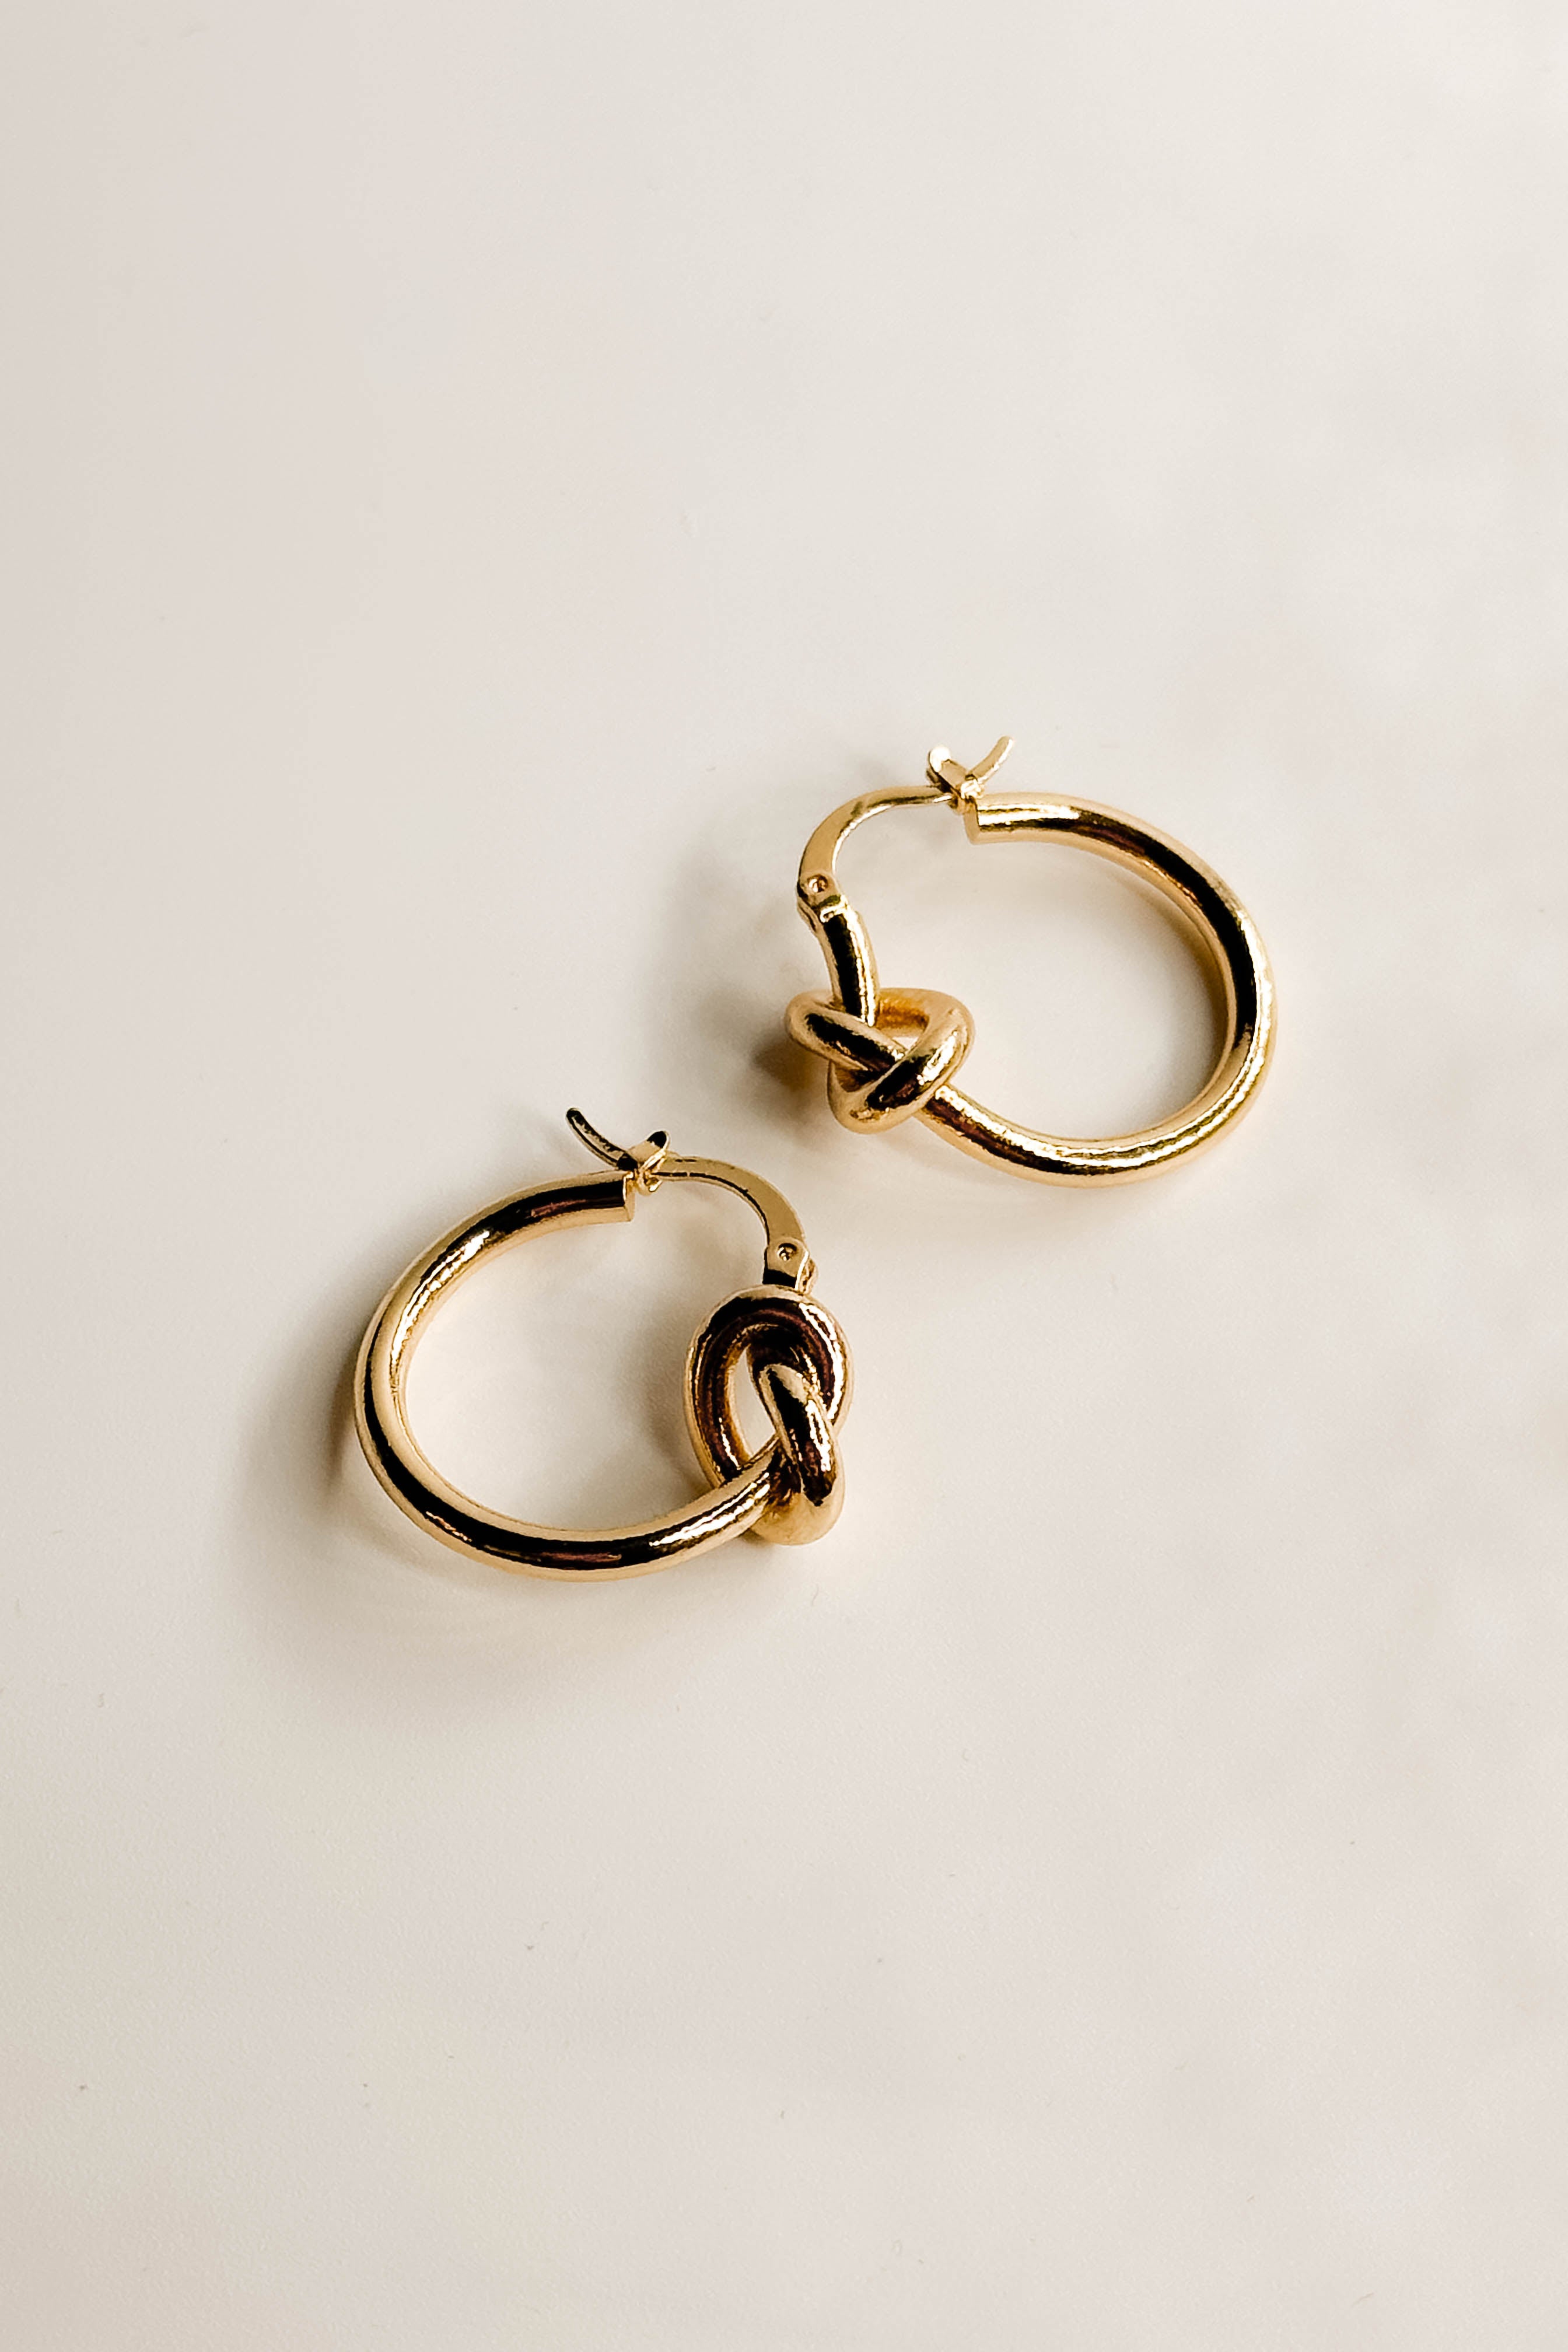 Close up side image of the Ava Gold Knot Hoop Earrings that feature small gold hoops with a knot design and clasp closure, shown on cream paper..